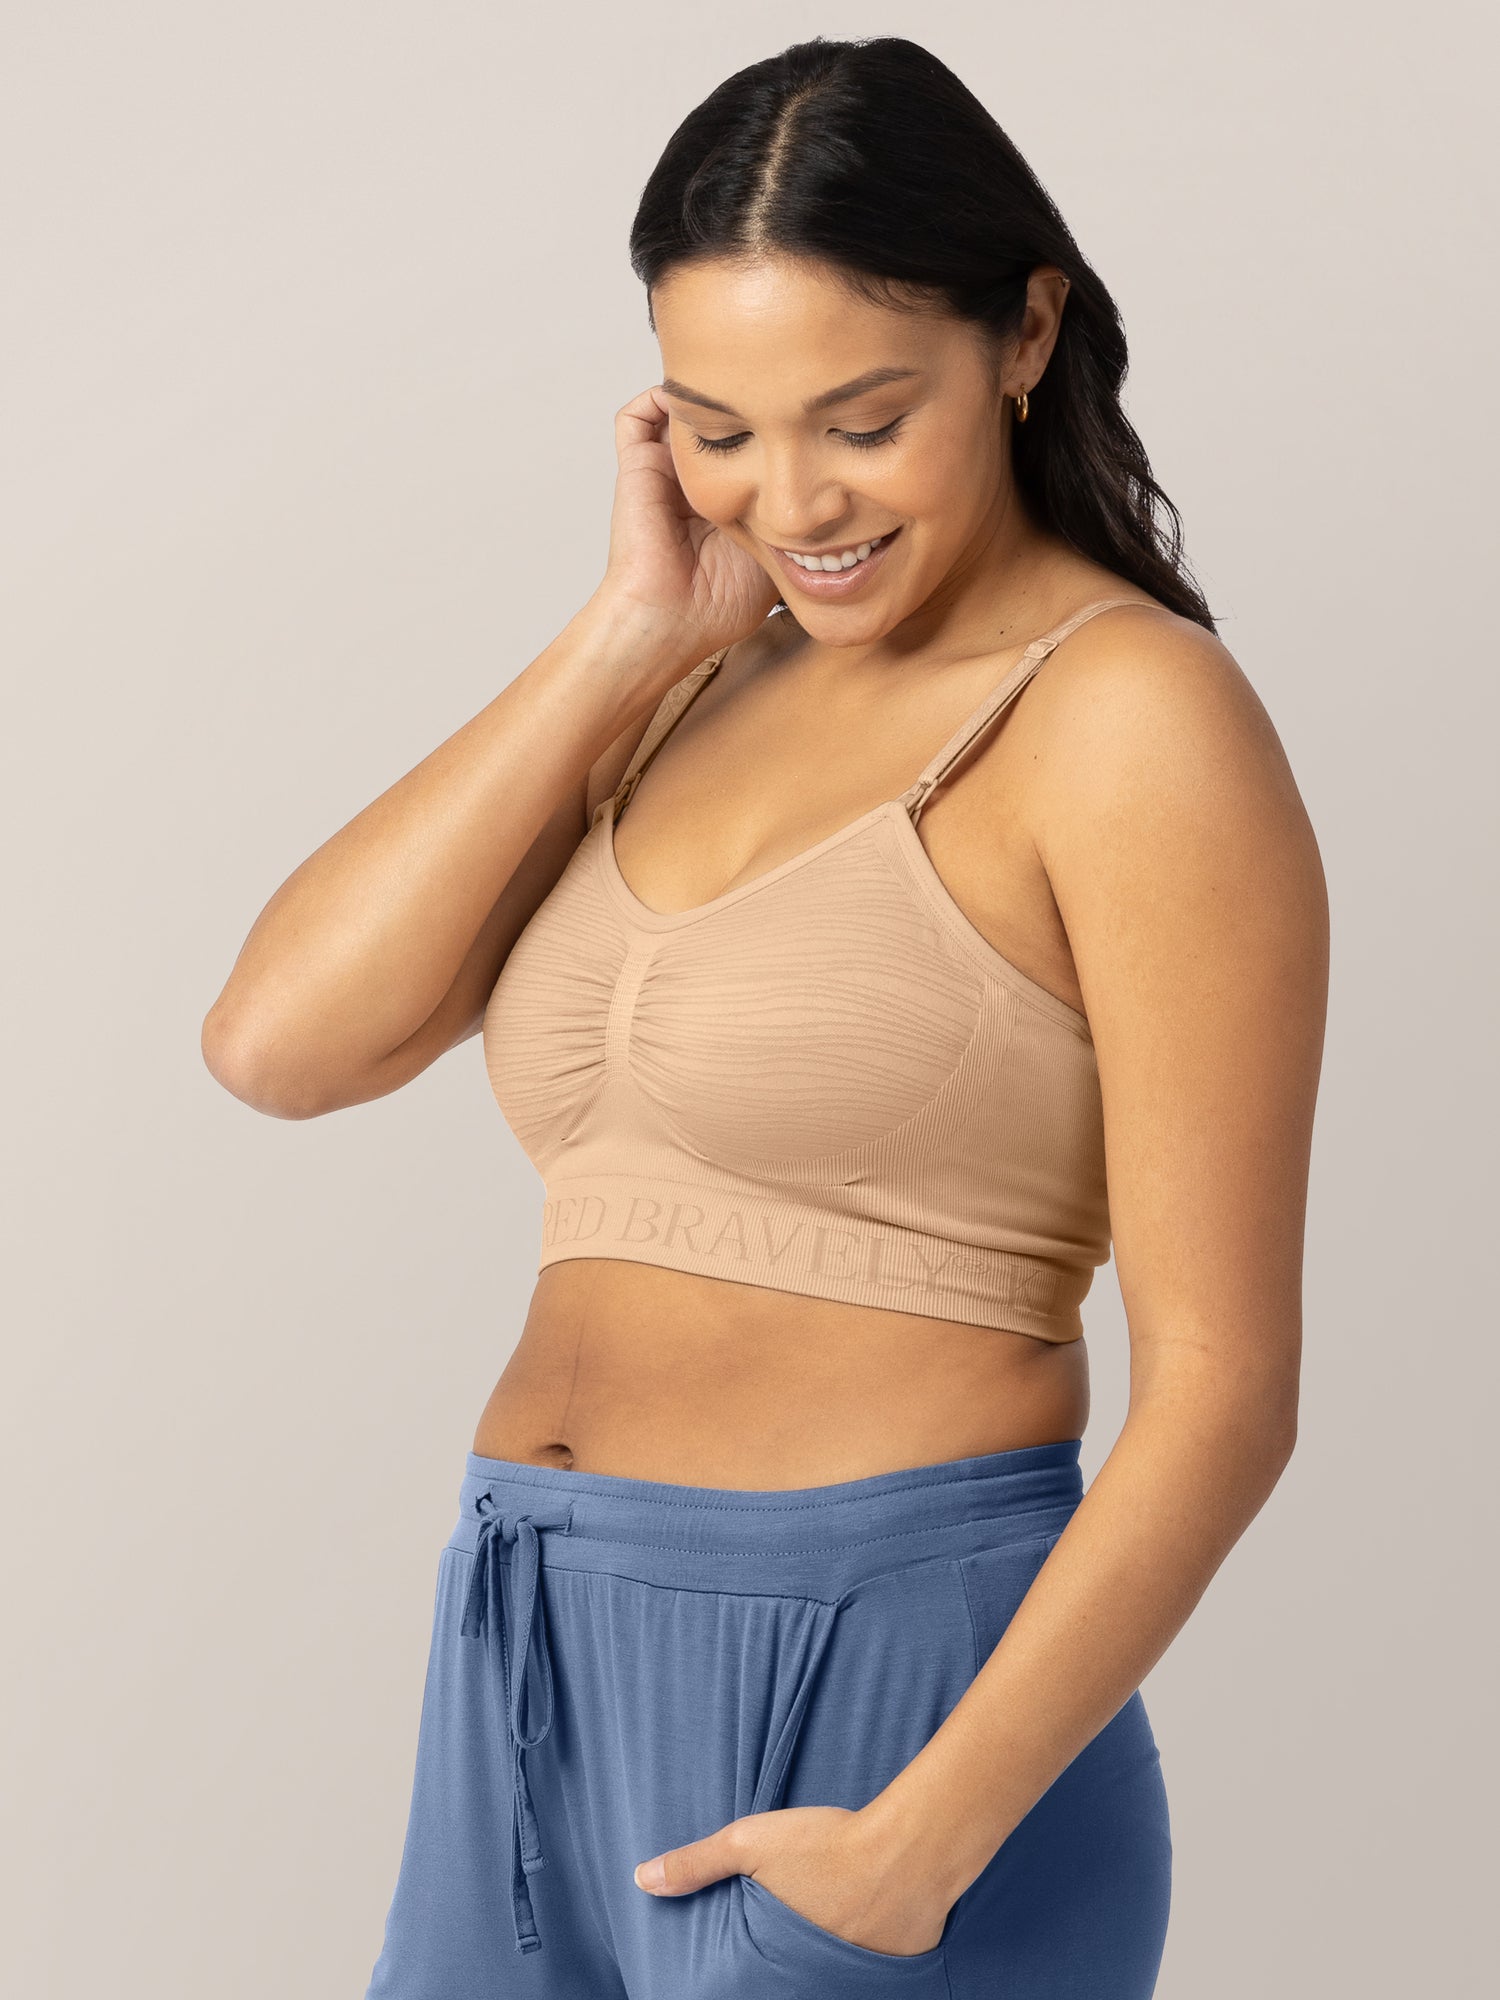 Kindred Bravely 3-Pack Hands Free Pumping Bra Wash, Wear, Spare Bundle  (Beige/Black, X-Large) at  Women's Clothing store